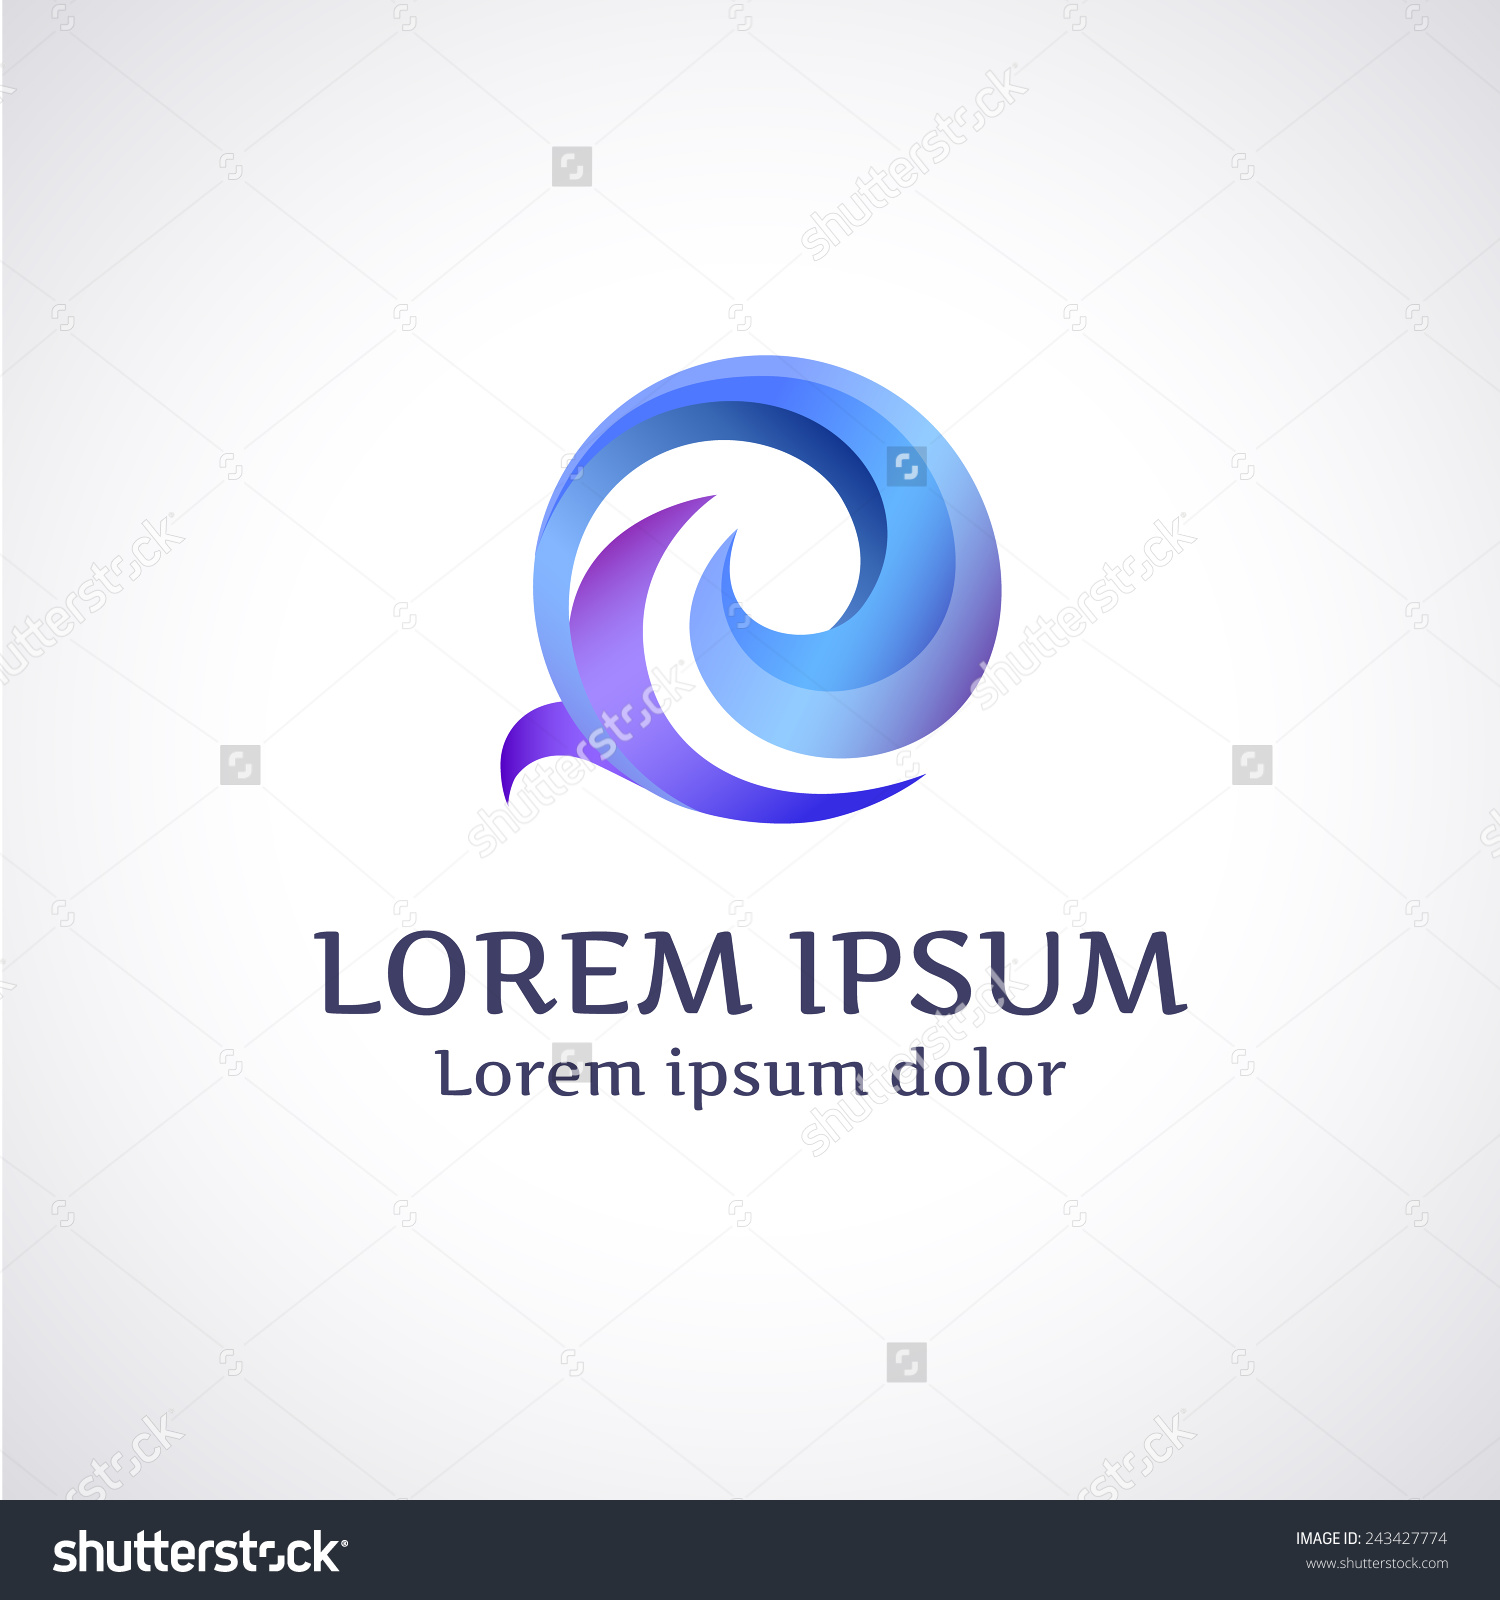 Abstract Brand Logo Template photo - 1